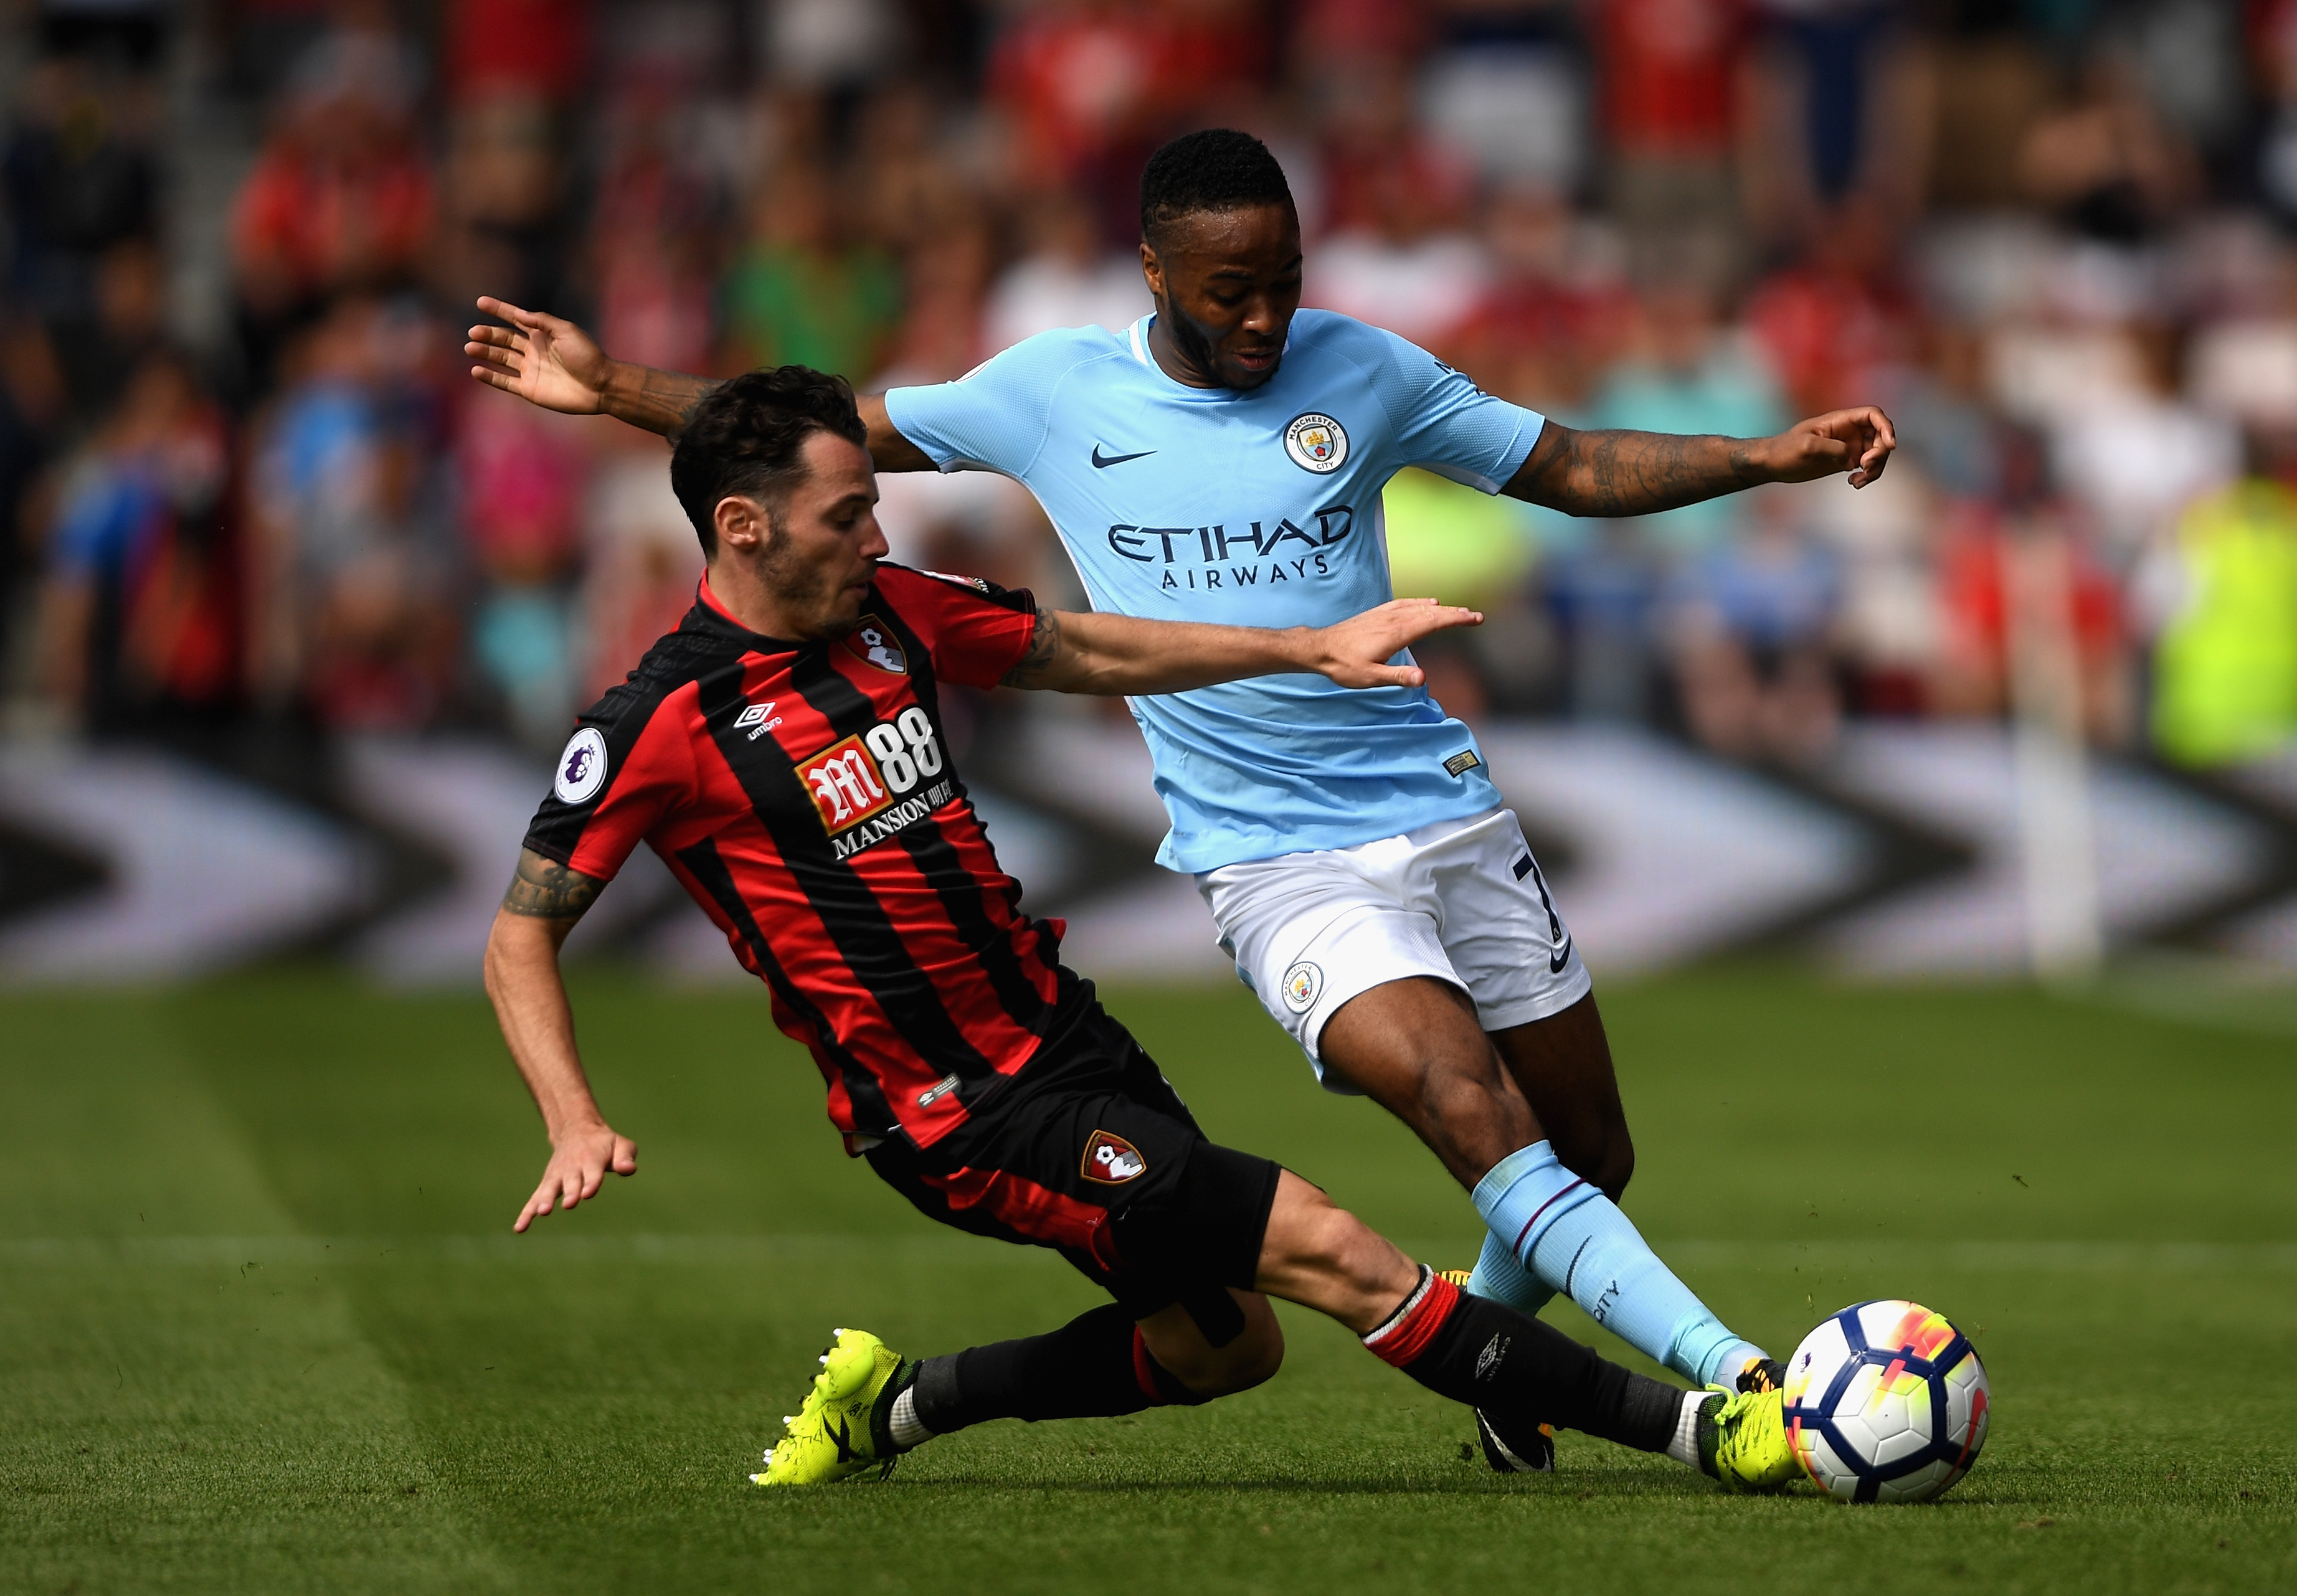 BOURNEMOUTH, ENGLAND - AUGUST 26:  Adam Smith of AFC Bournemouth and Raheem Sterling of Manchester City battle for possession during the Premier League match between AFC Bournemouth and Manchester City at Vitality Stadium on August 26, 2017 in Bournemouth, England.  (Photo by Mike Hewitt/Getty Images)